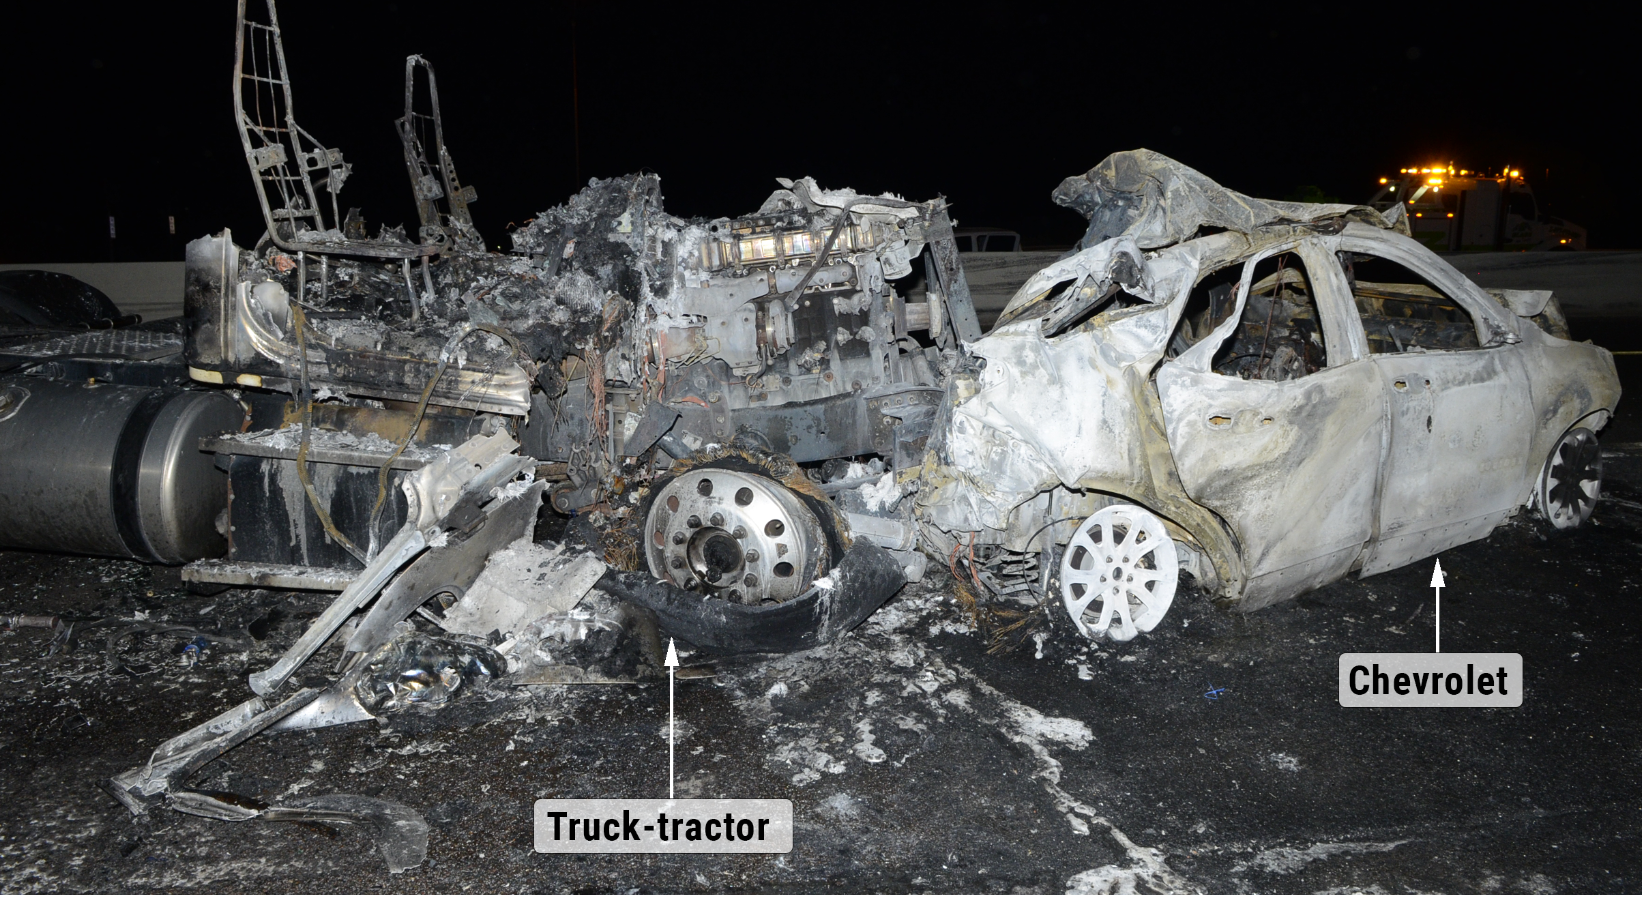 On-scene, postcrash photo of the severely collision-damaged and burned-out remnants of the truck-tractor and the Chevrolet, seen